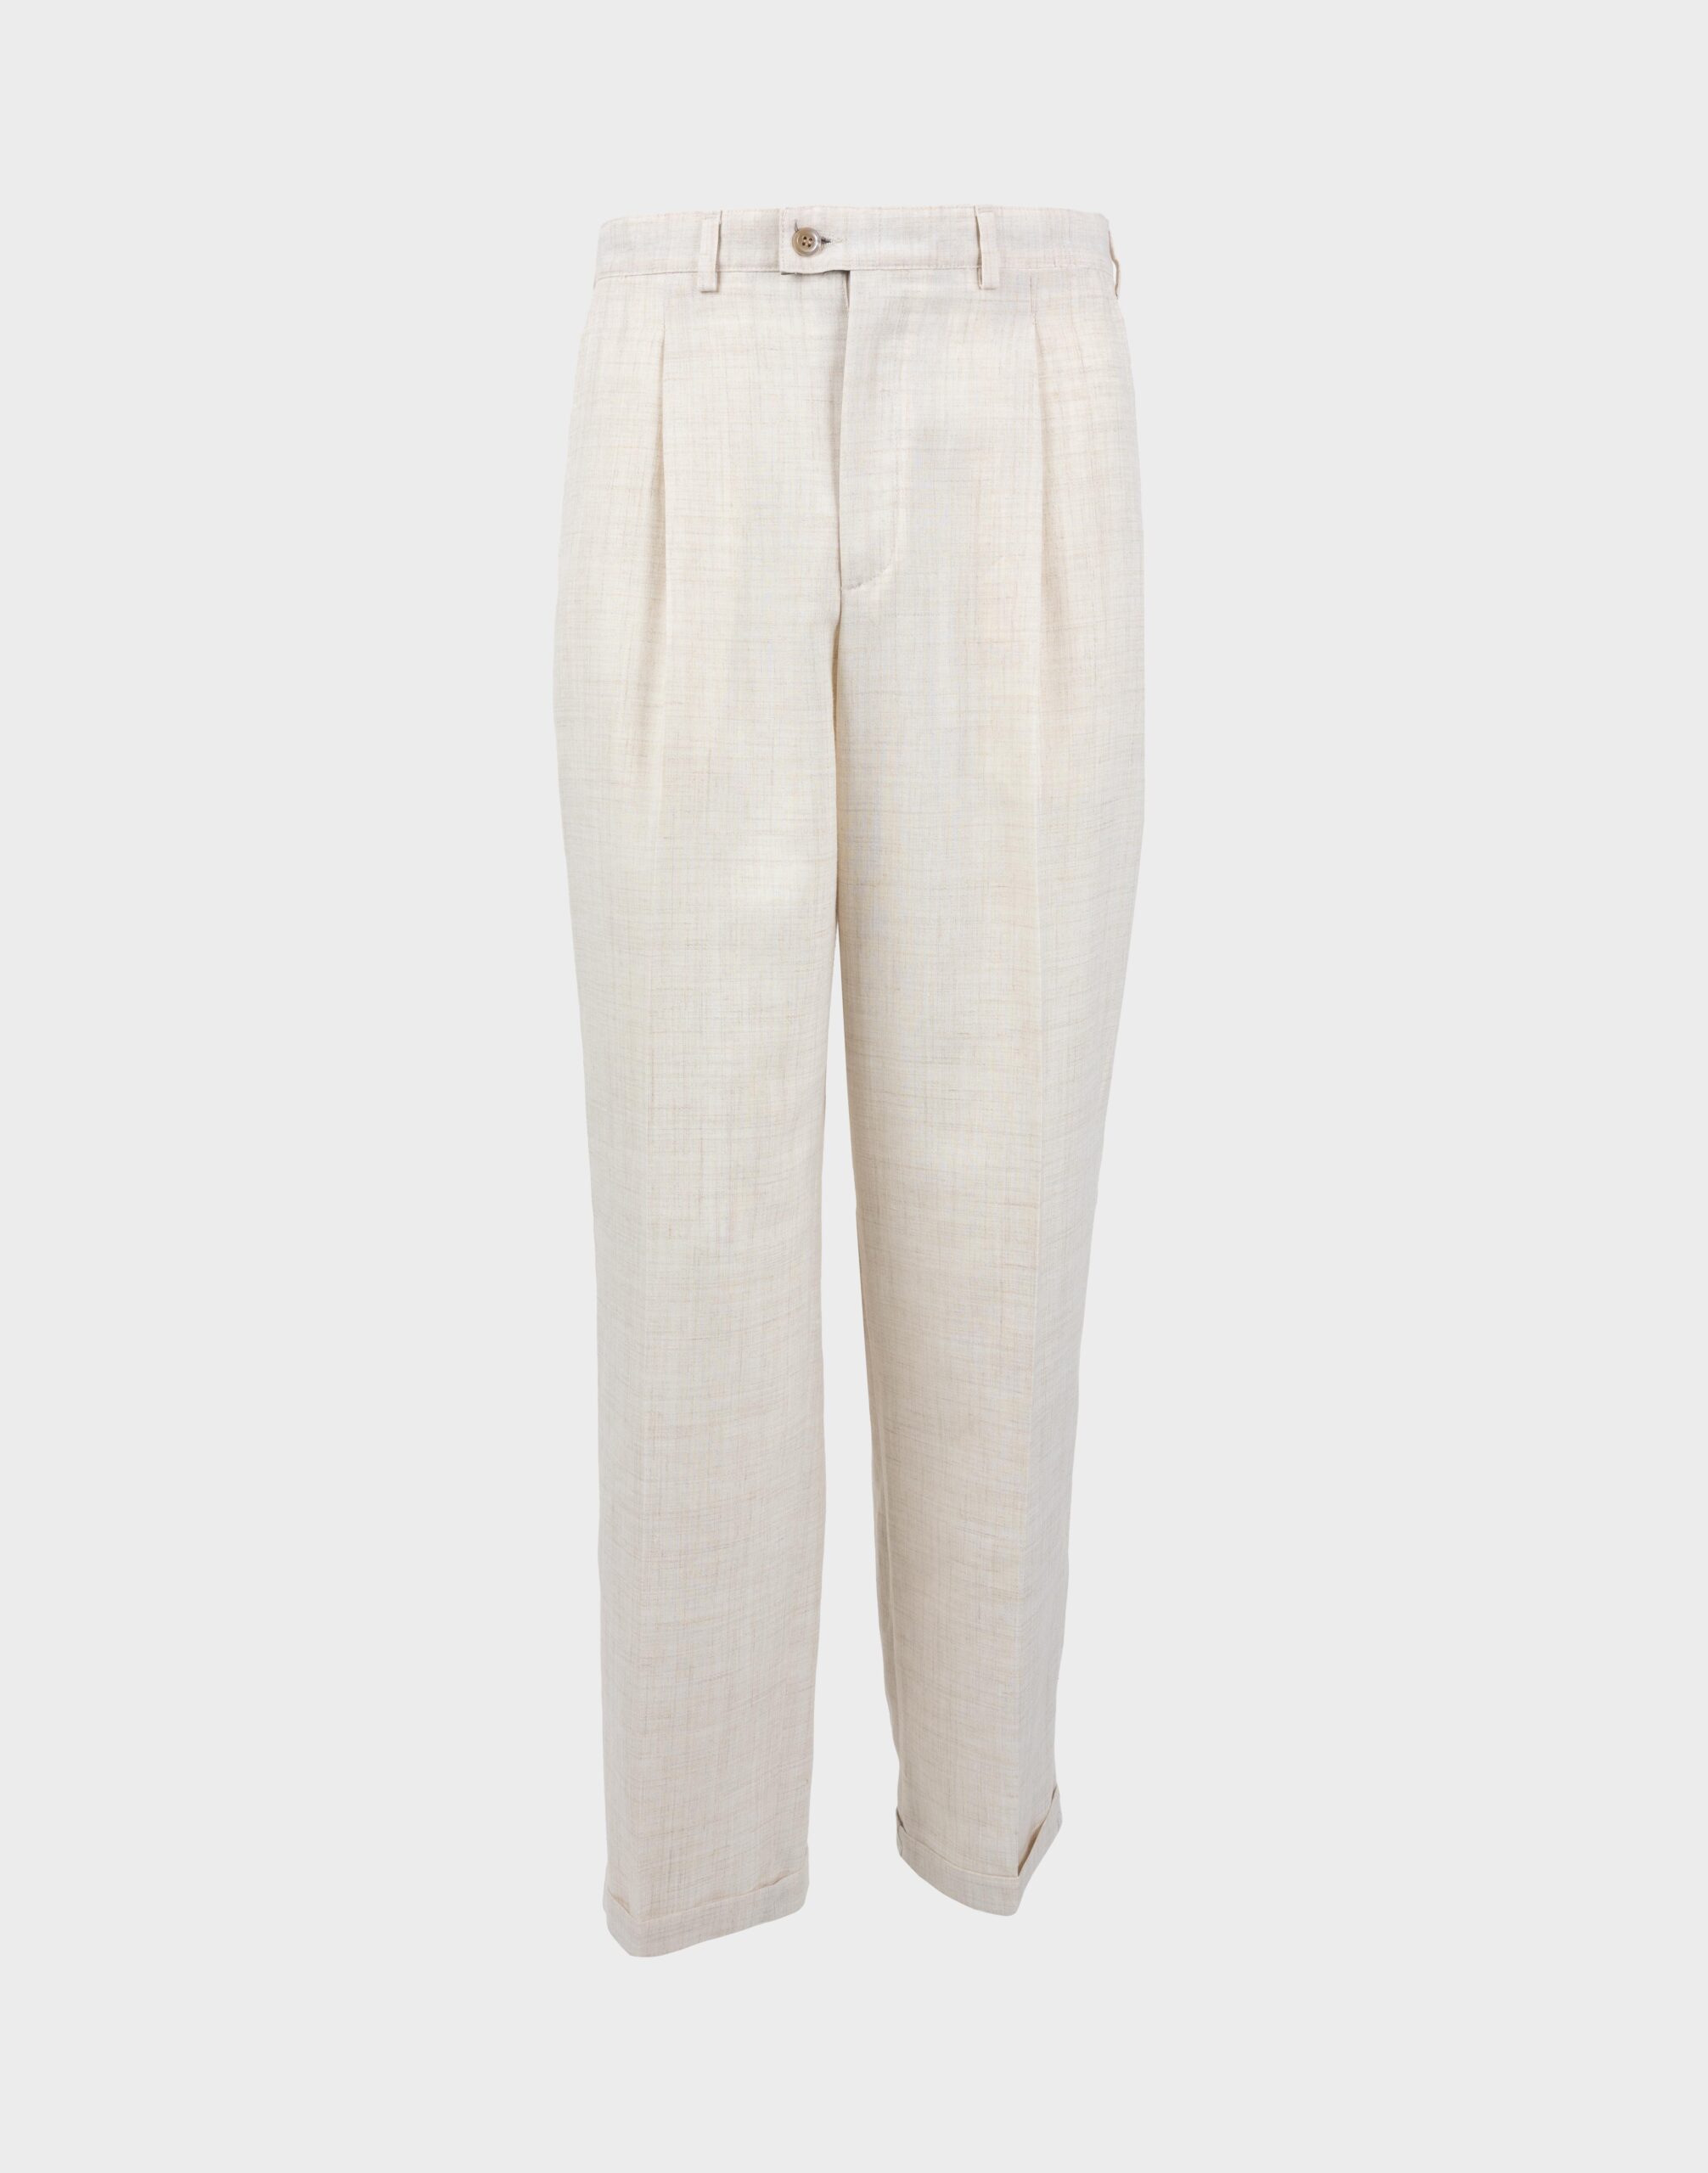 Beige linen trousers for men with front pleats and cuffs at the bottom.